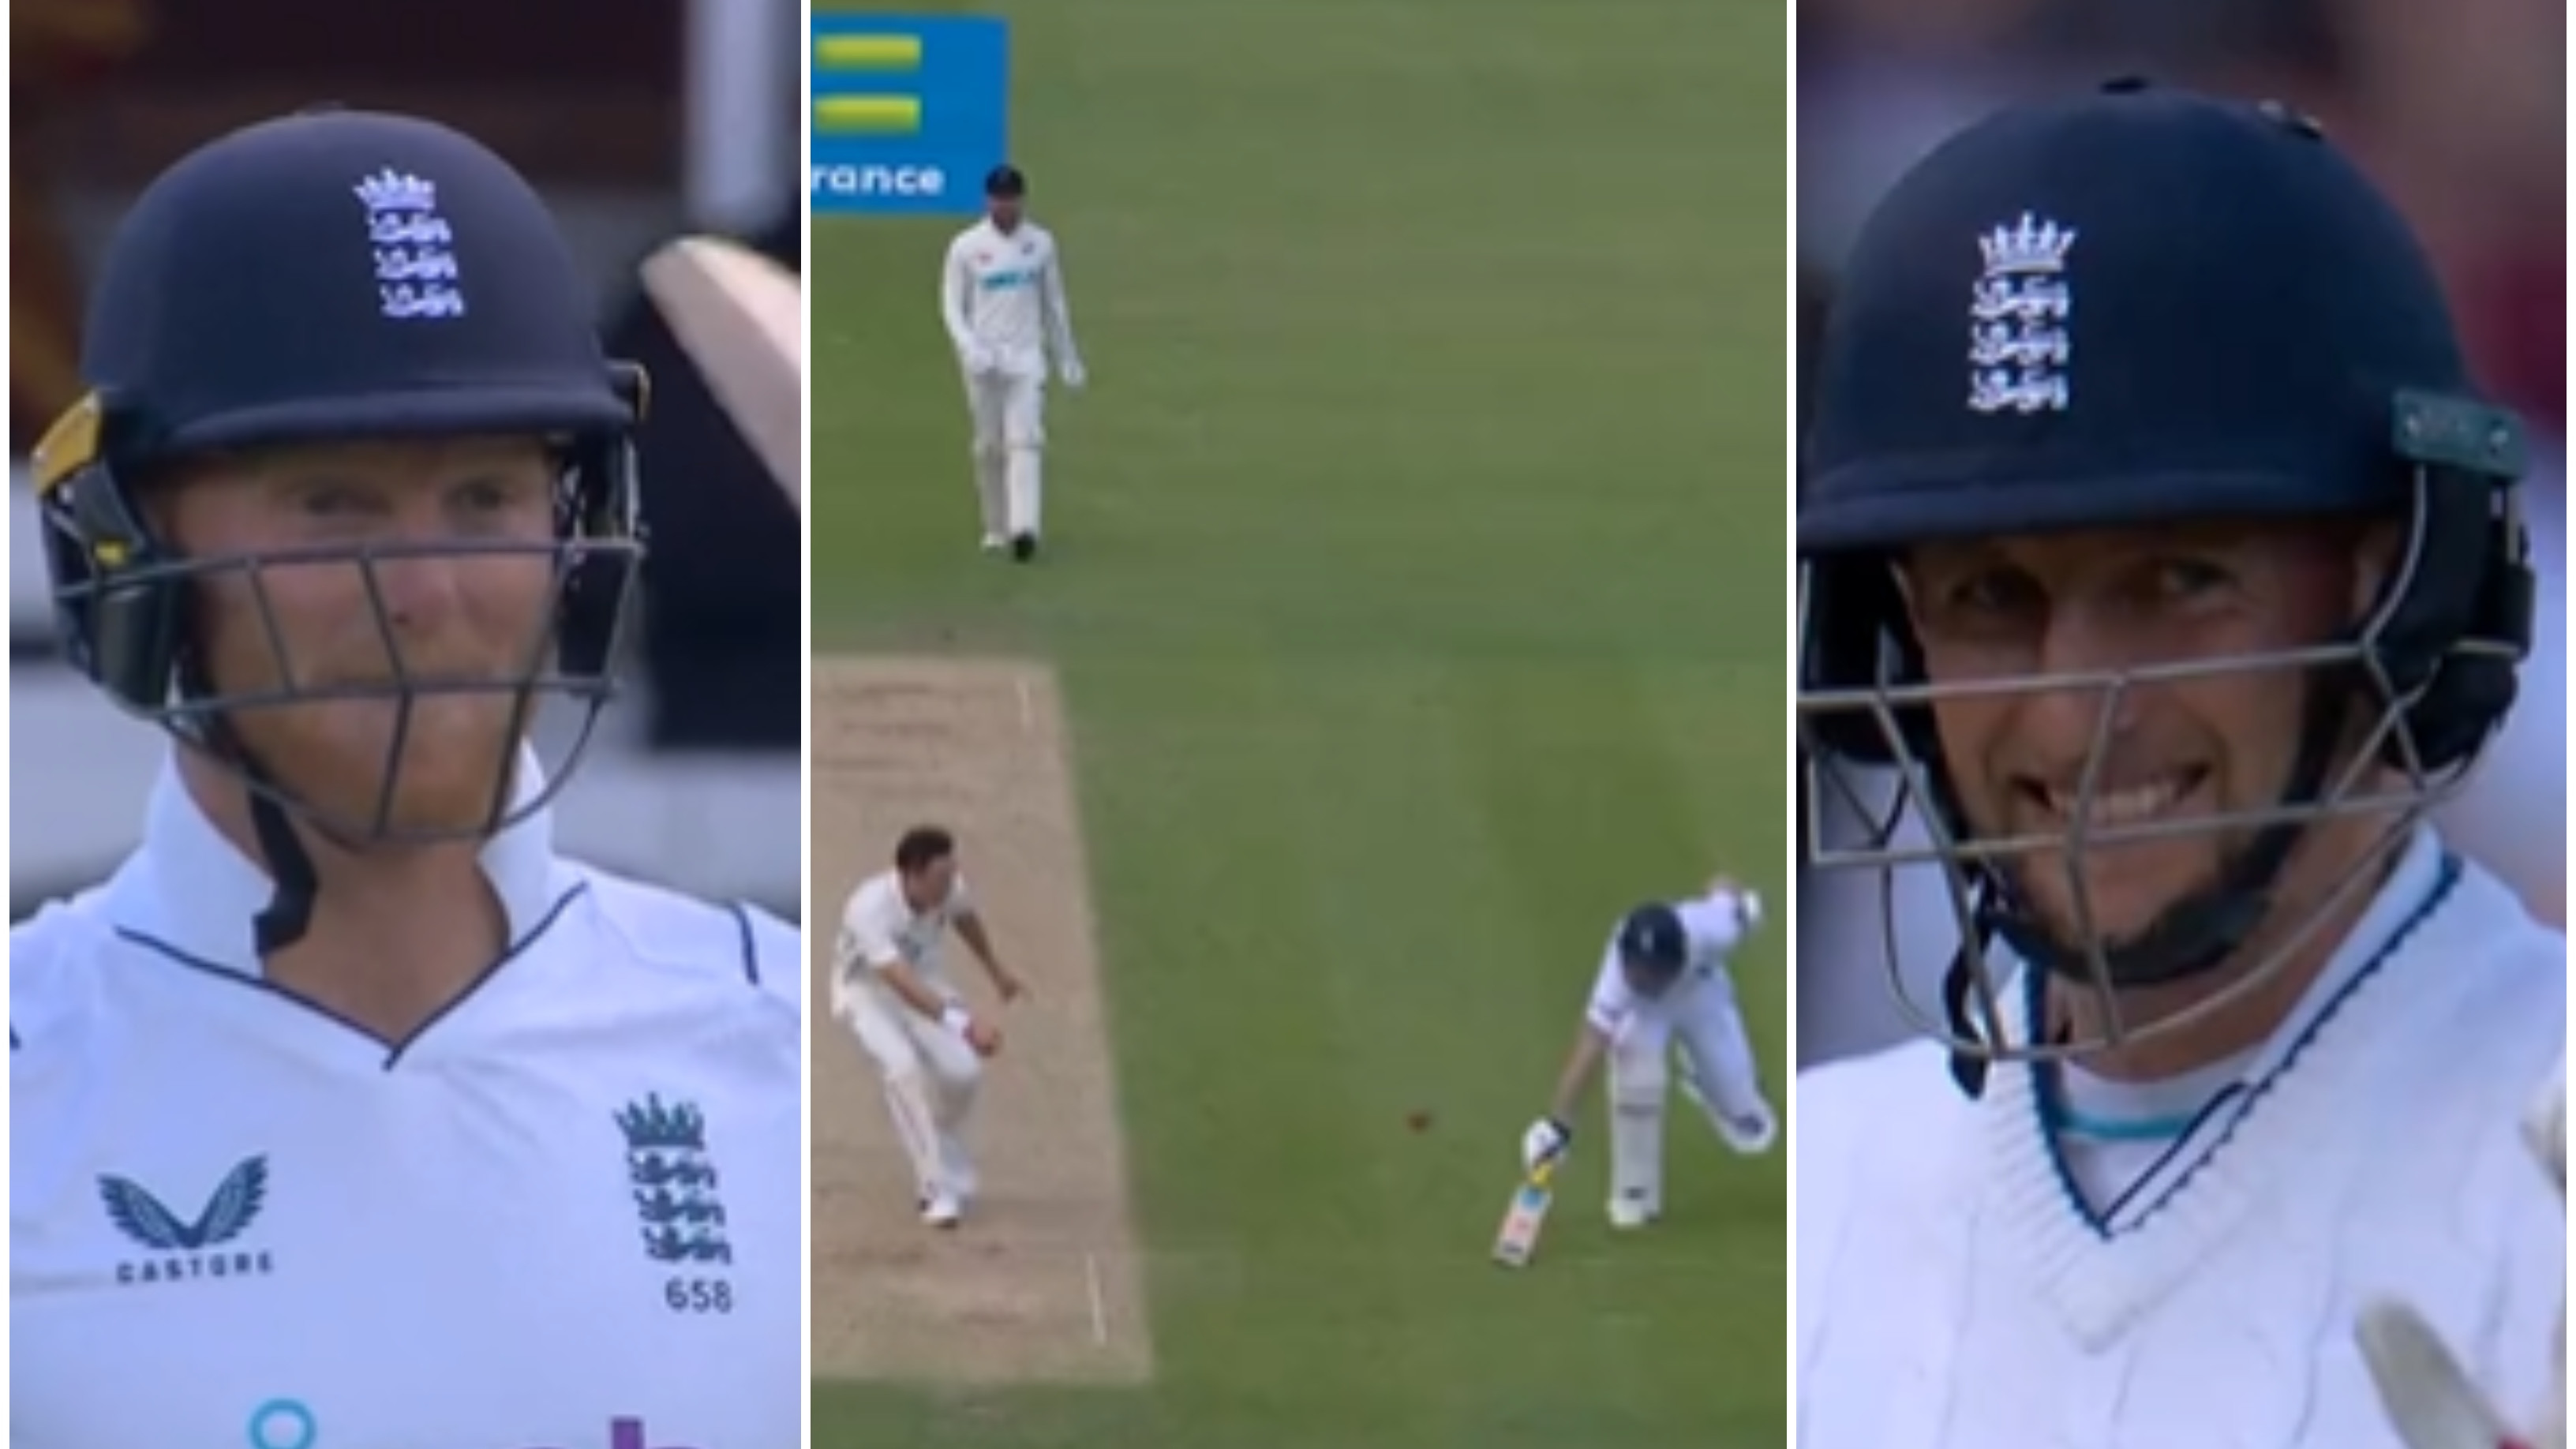 ENG v NZ 2022: WATCH – Kiwi fielder’s throw once again deflects off Stokes’ bat at Lord's; England skipper, Root react